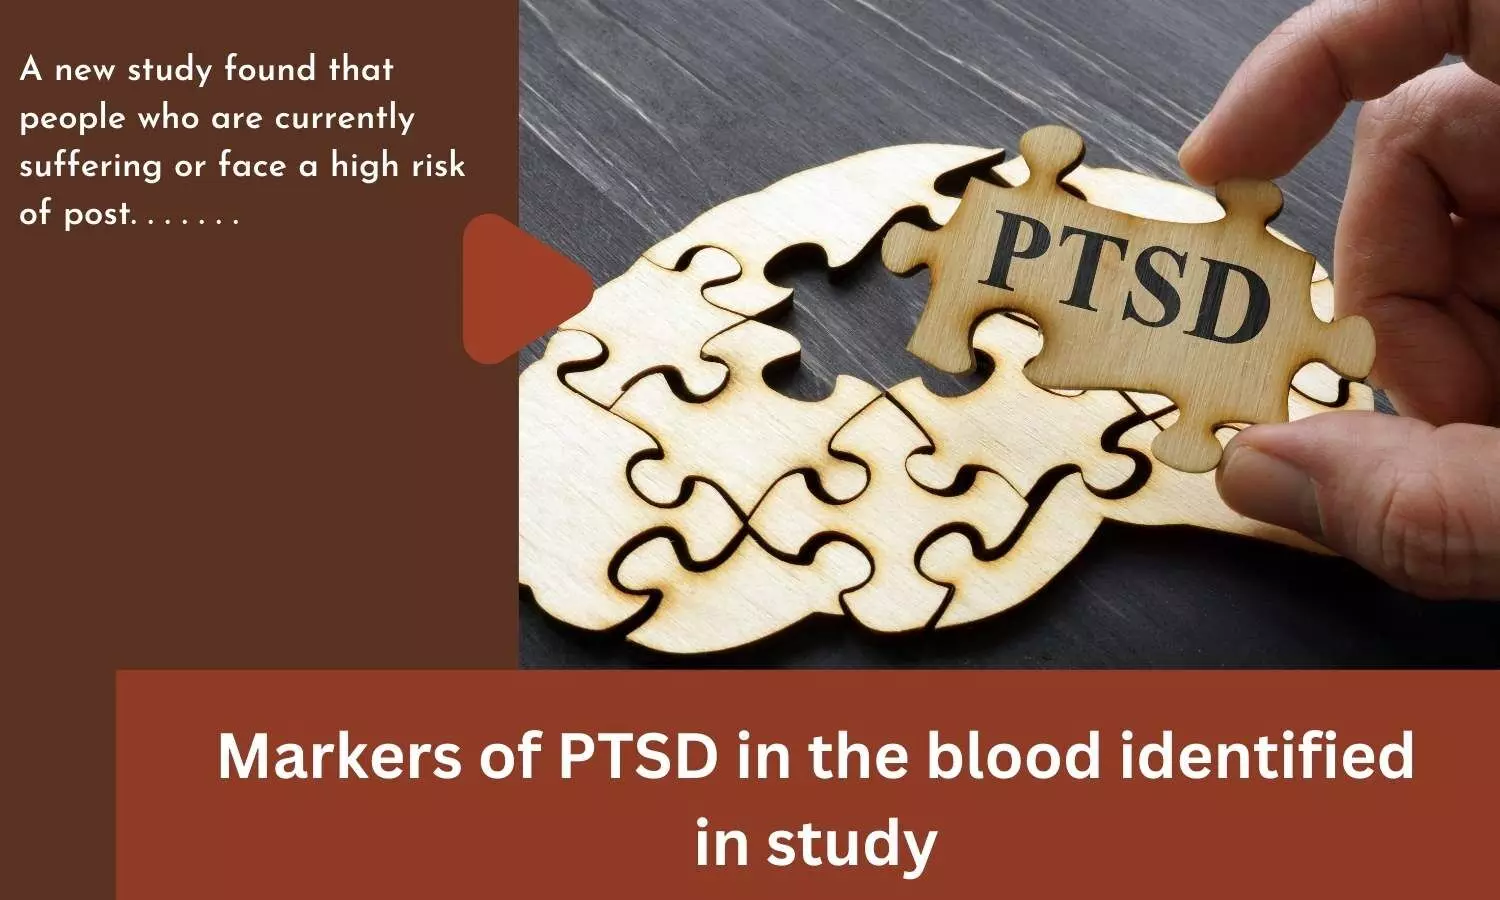 Markers of PTSD in the blood identified in study